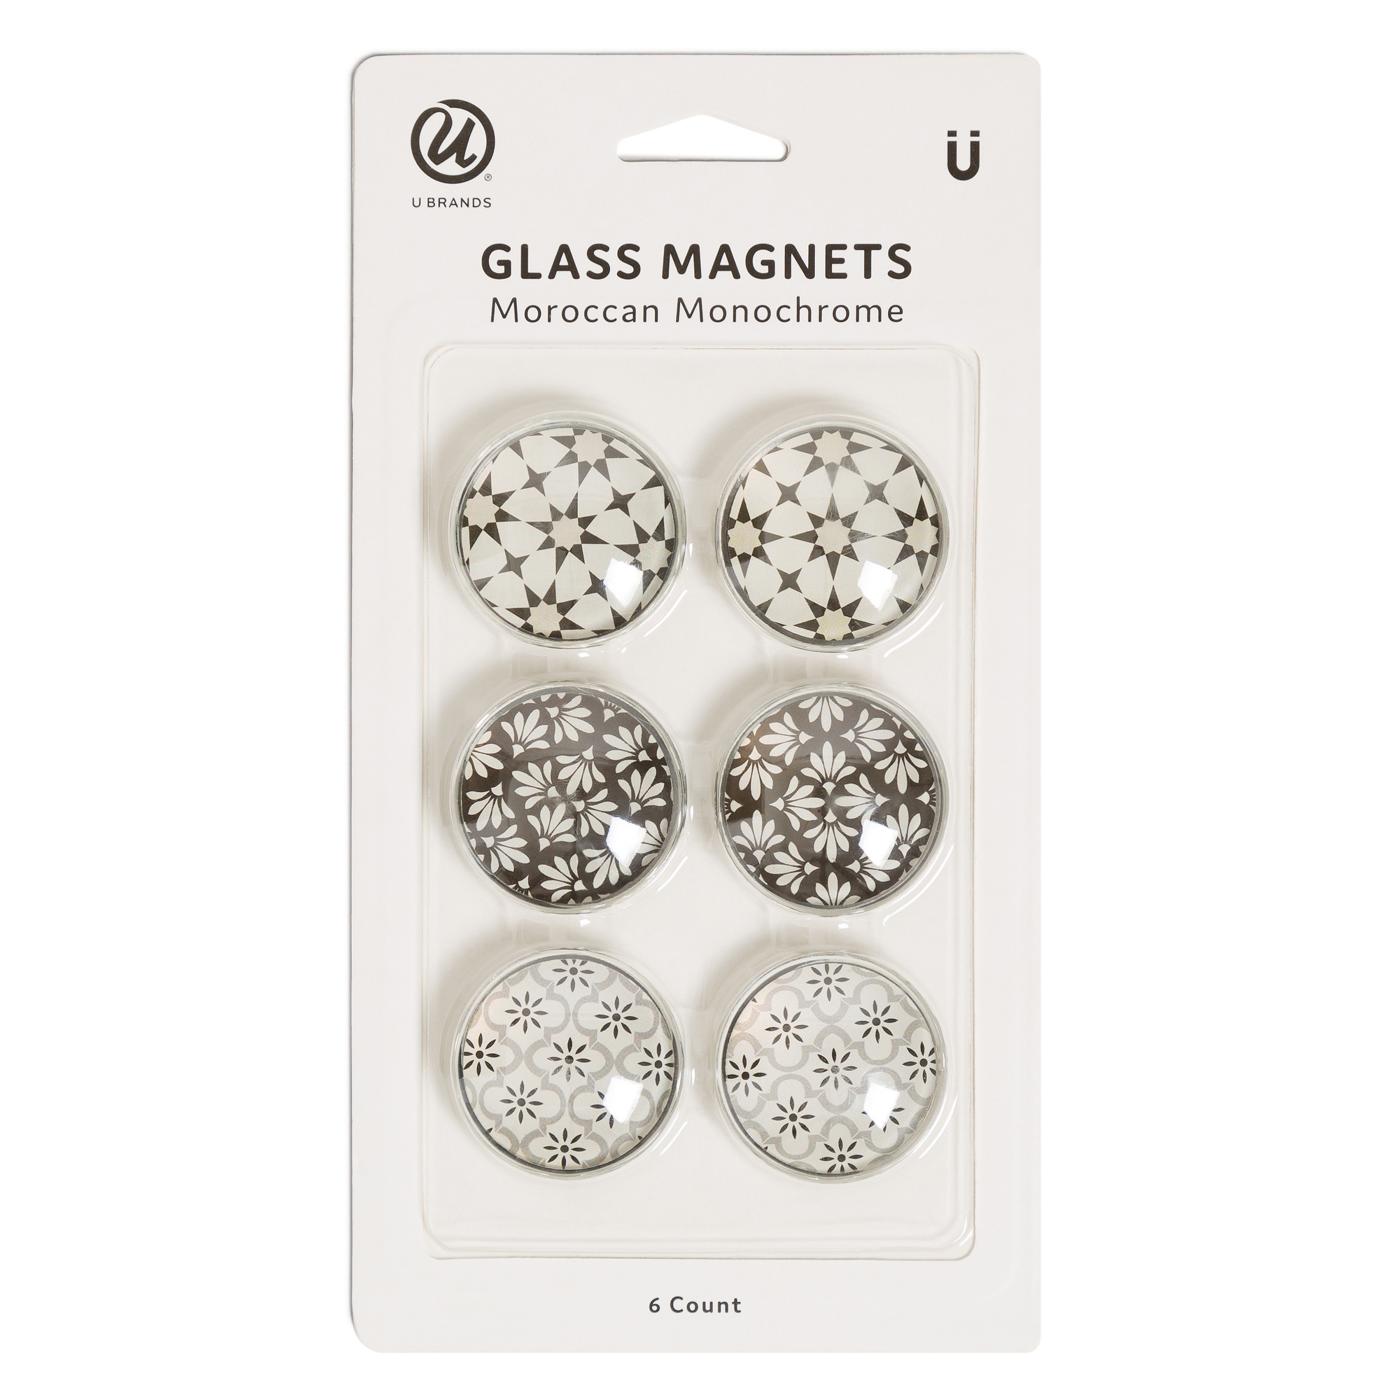 U Brands Moroccan Monochrome Round Glass Magnets; image 1 of 2